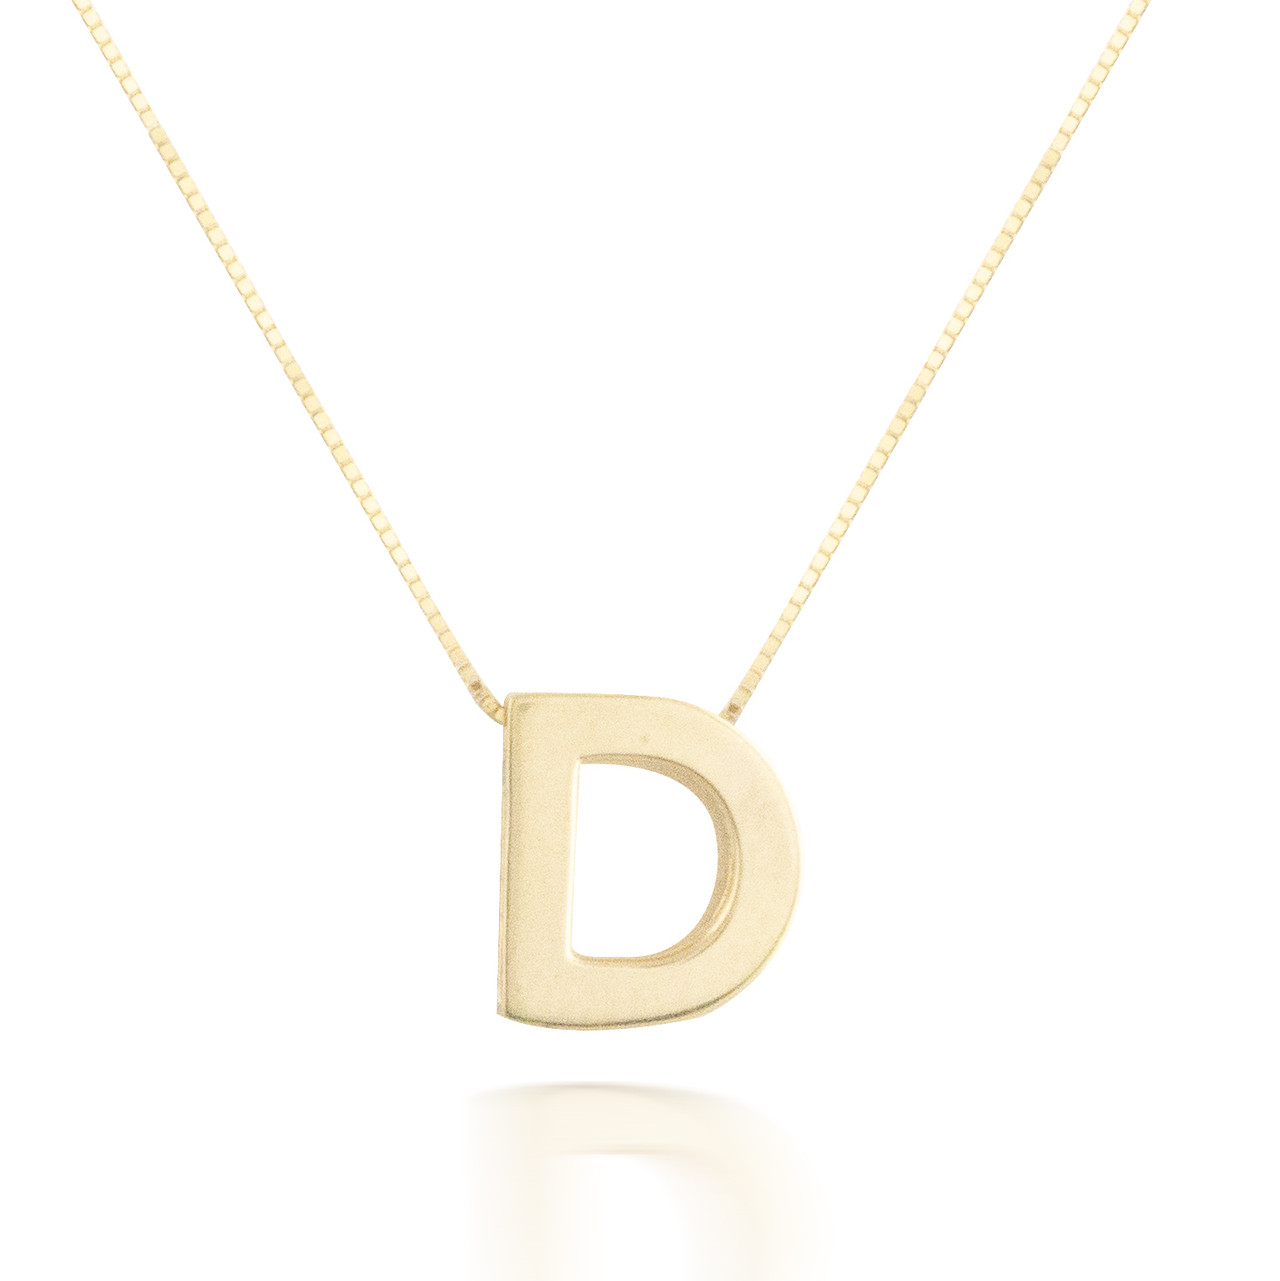 Necklaces from Barsky Diamonds